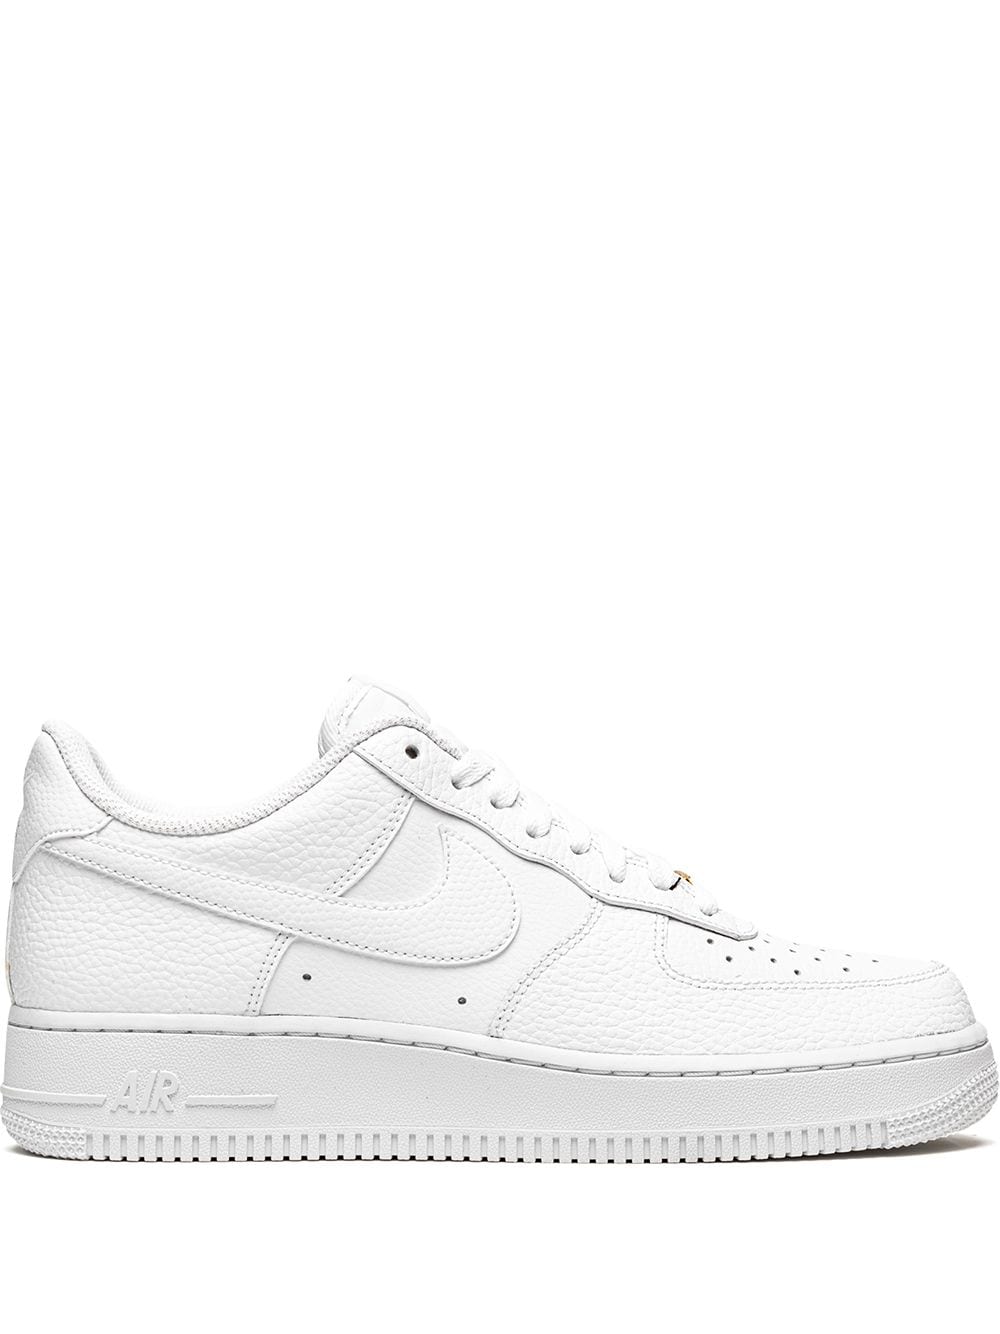 Image 1 of Nike Air Force 1 Low '07 "White/Metallic Gold" sneakers